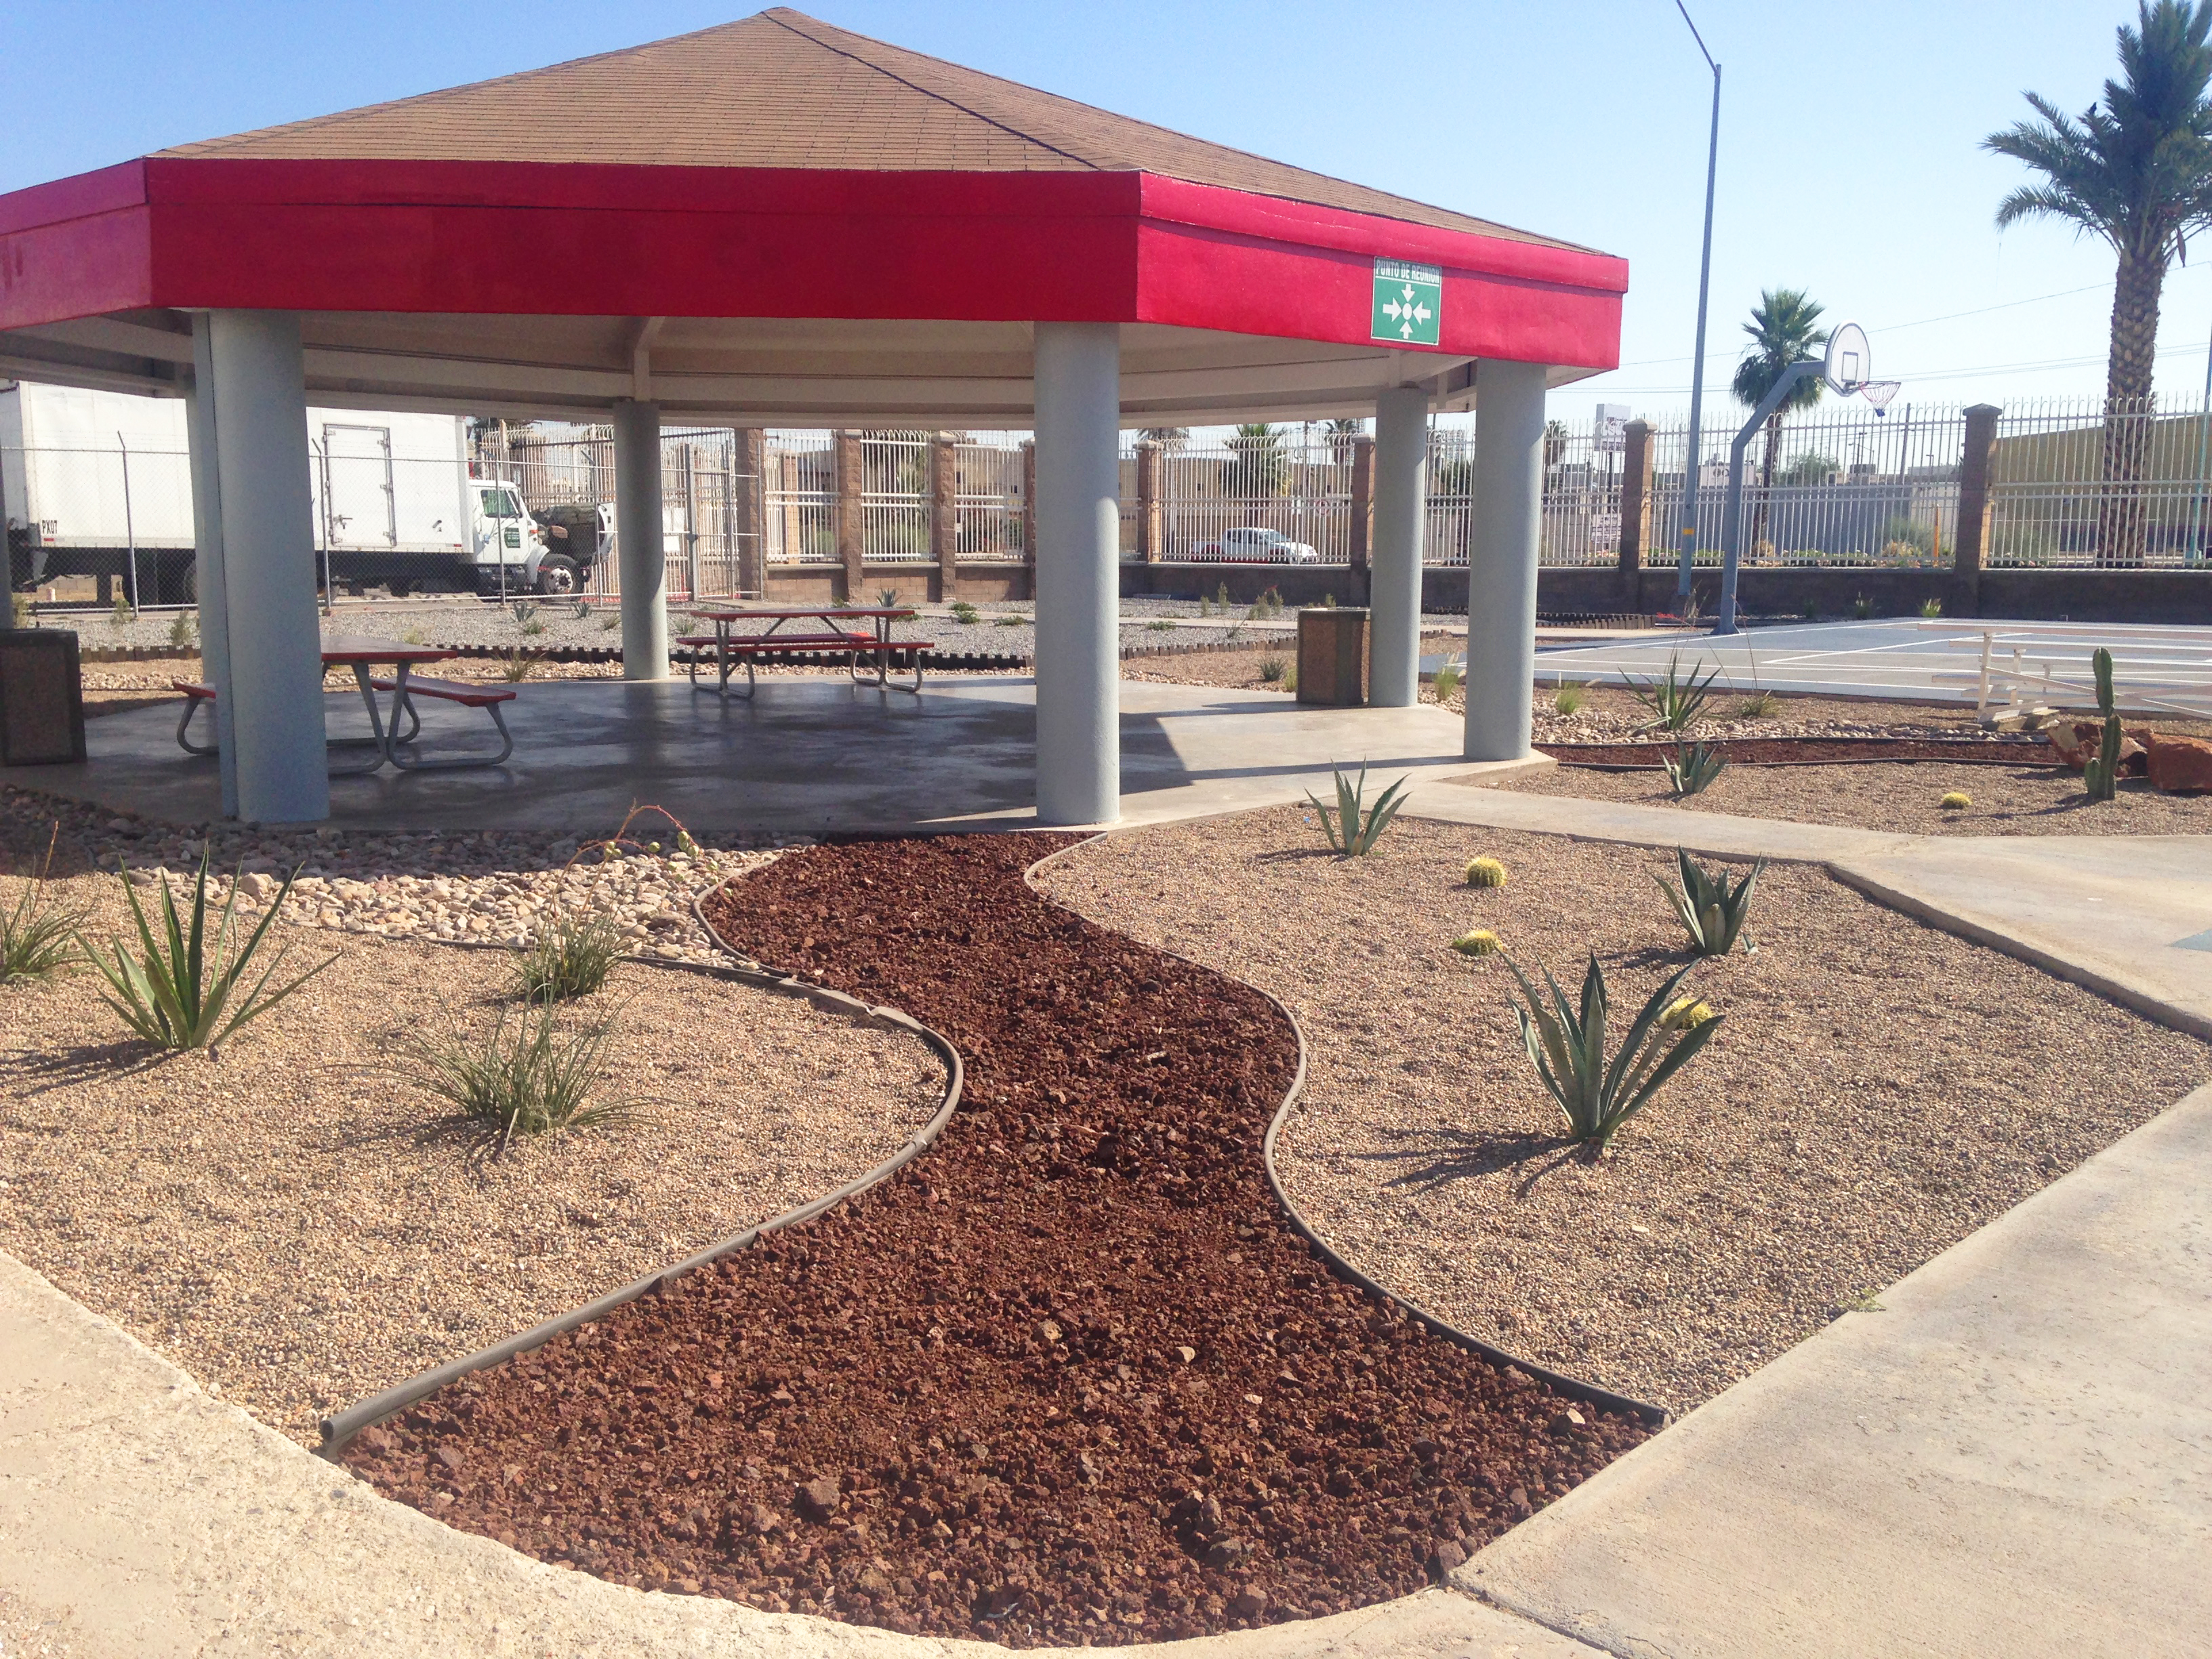 Bosch Mexicali facility reduces water consumption in desert climate - PIMSA INDUSTRIAL PARKS IN MEXICO 6